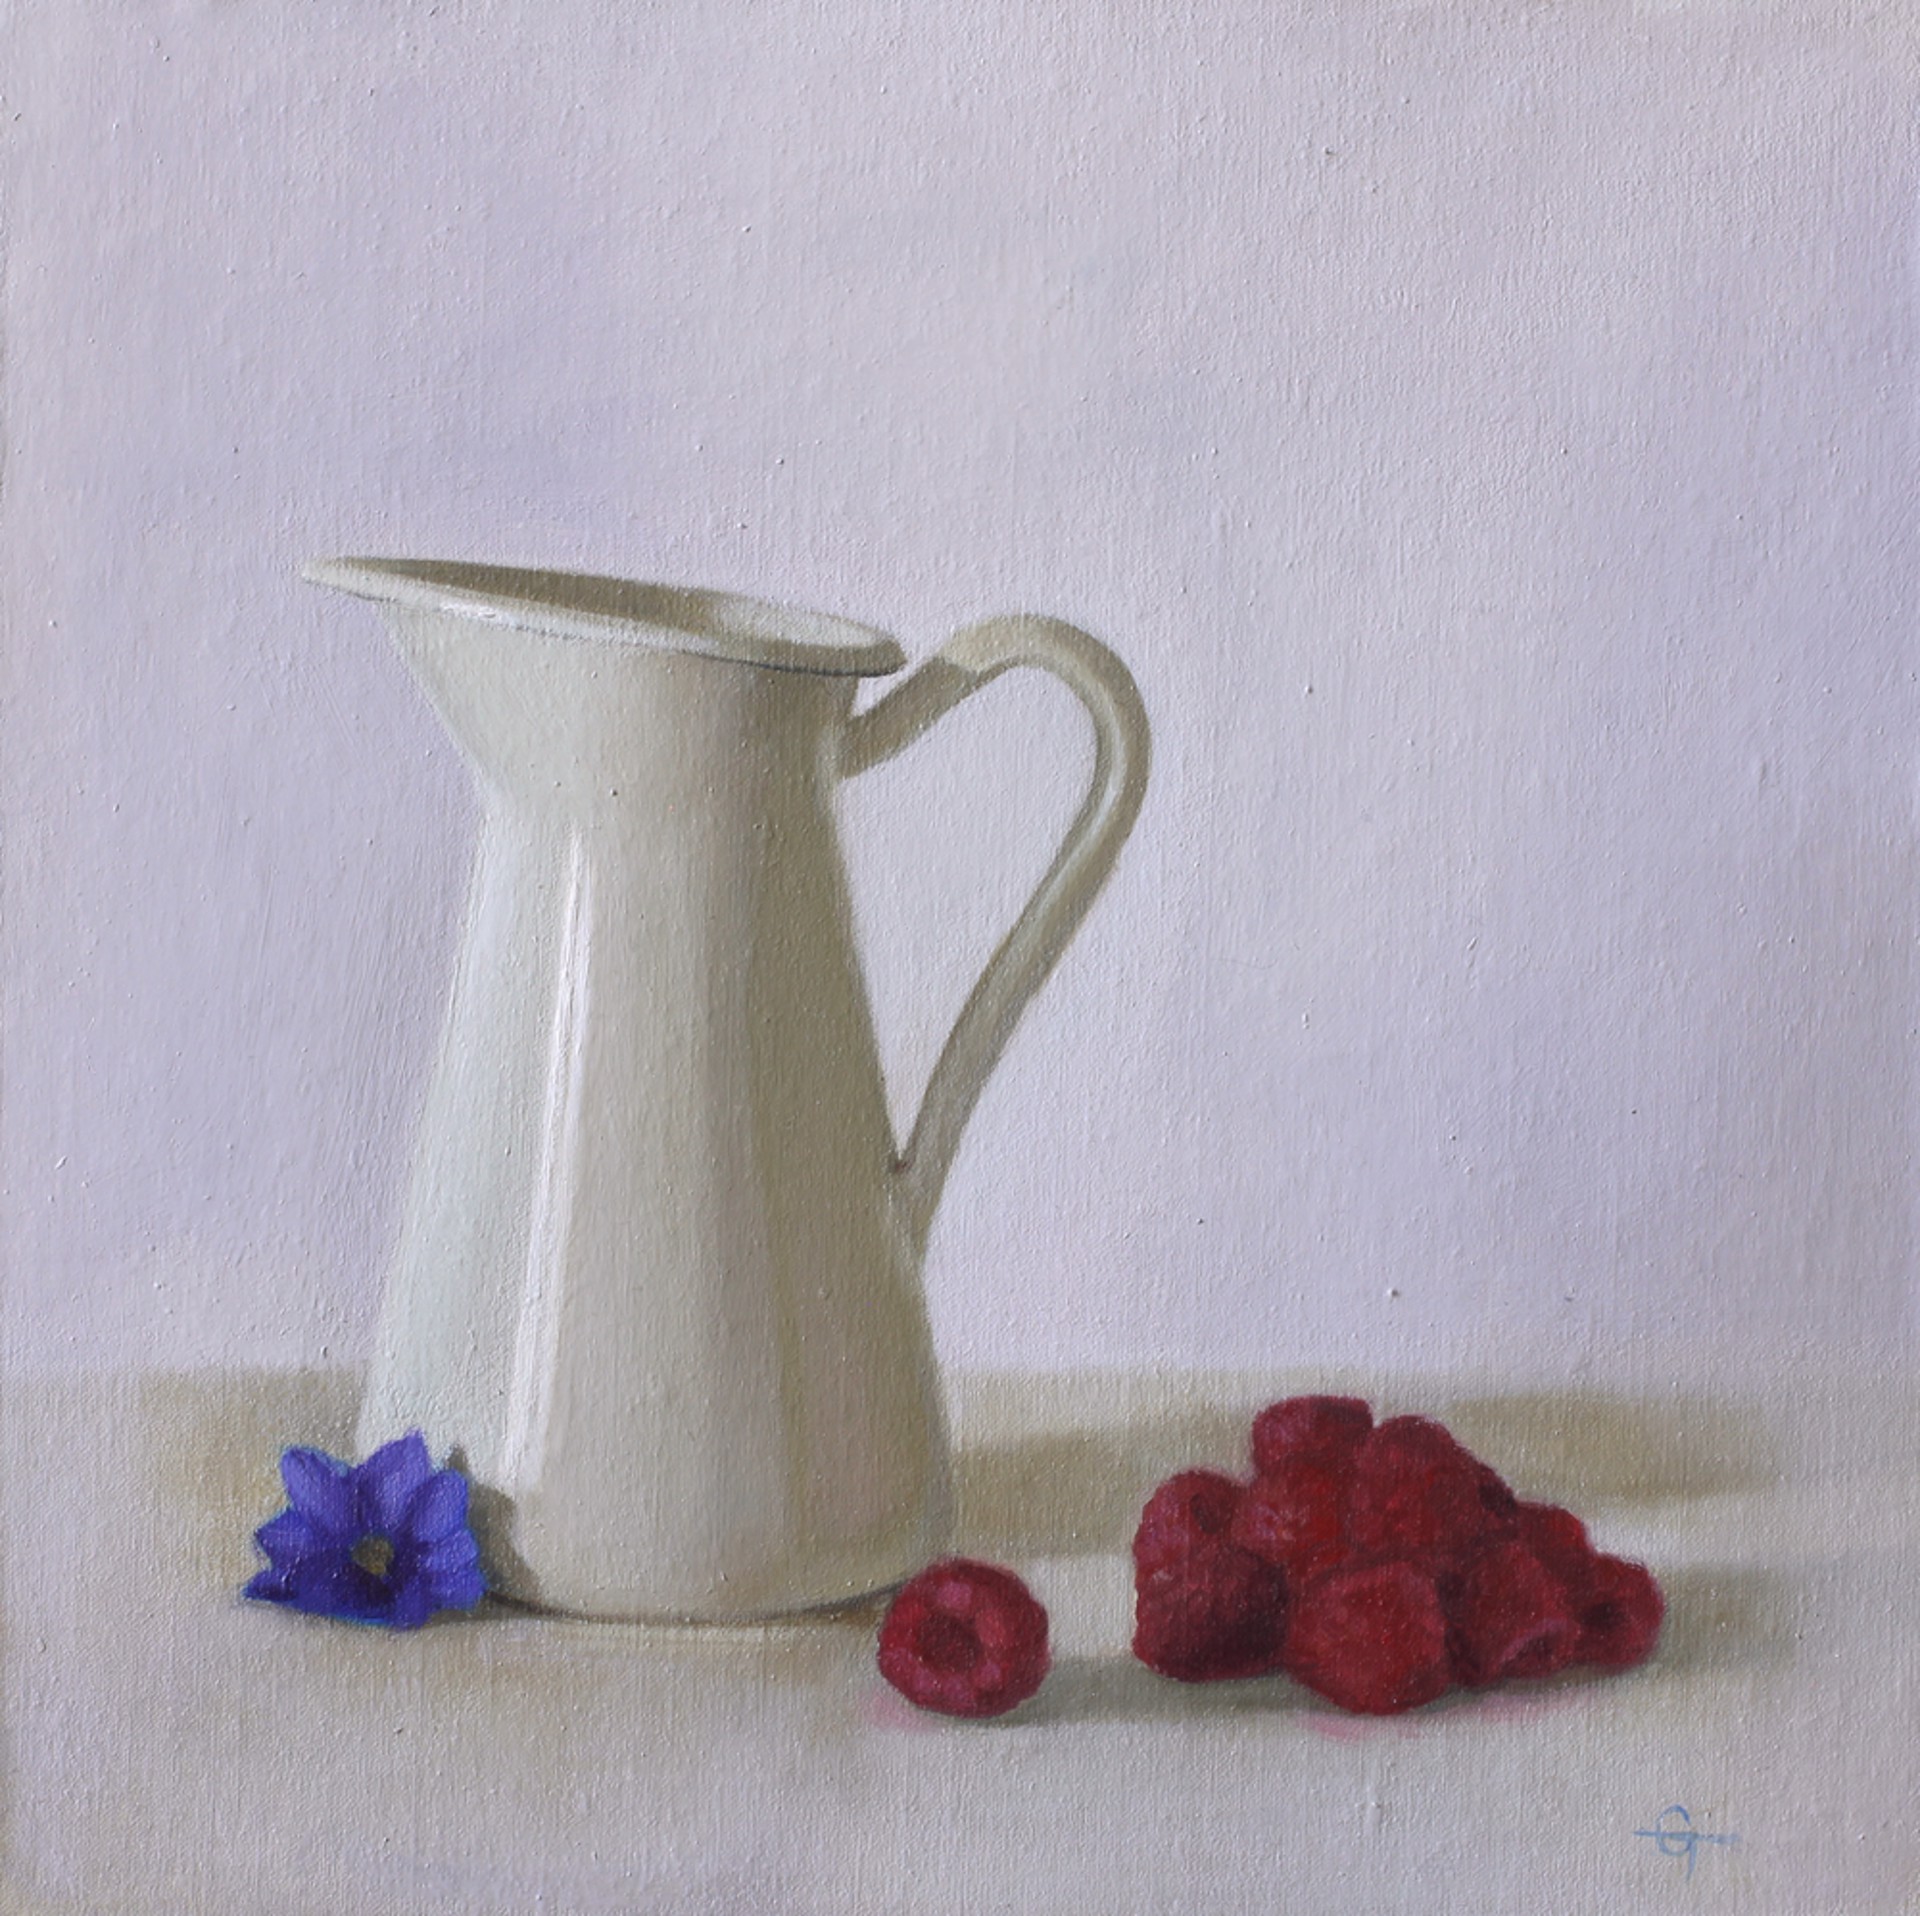 Raspberries and Cream by Cecilia Thorell